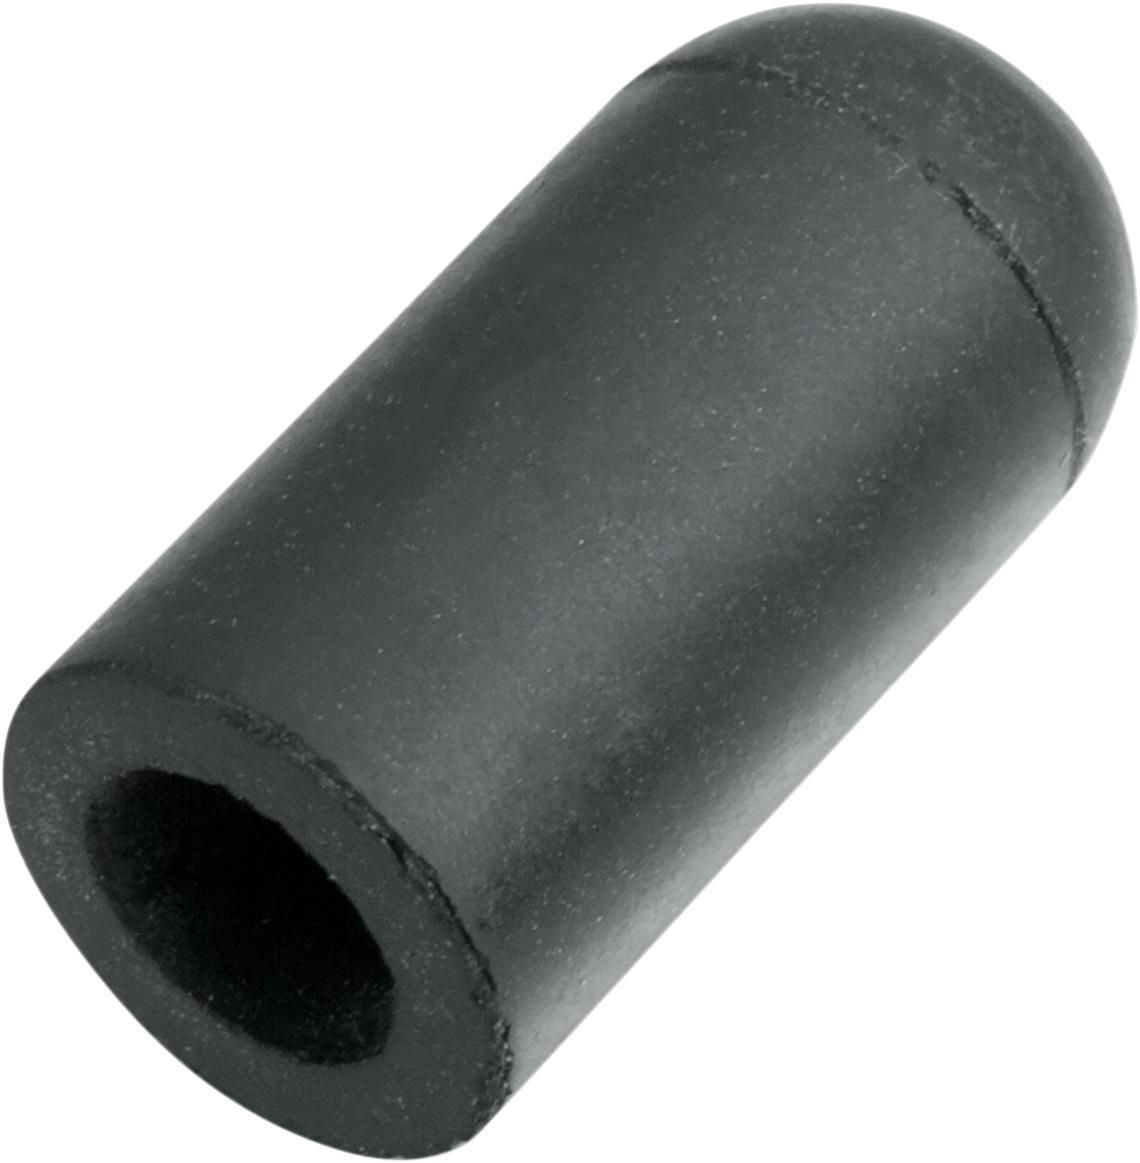 4IXG-S-S-CYCLE-50-8372 Cap Fitting - 3/16" VOES